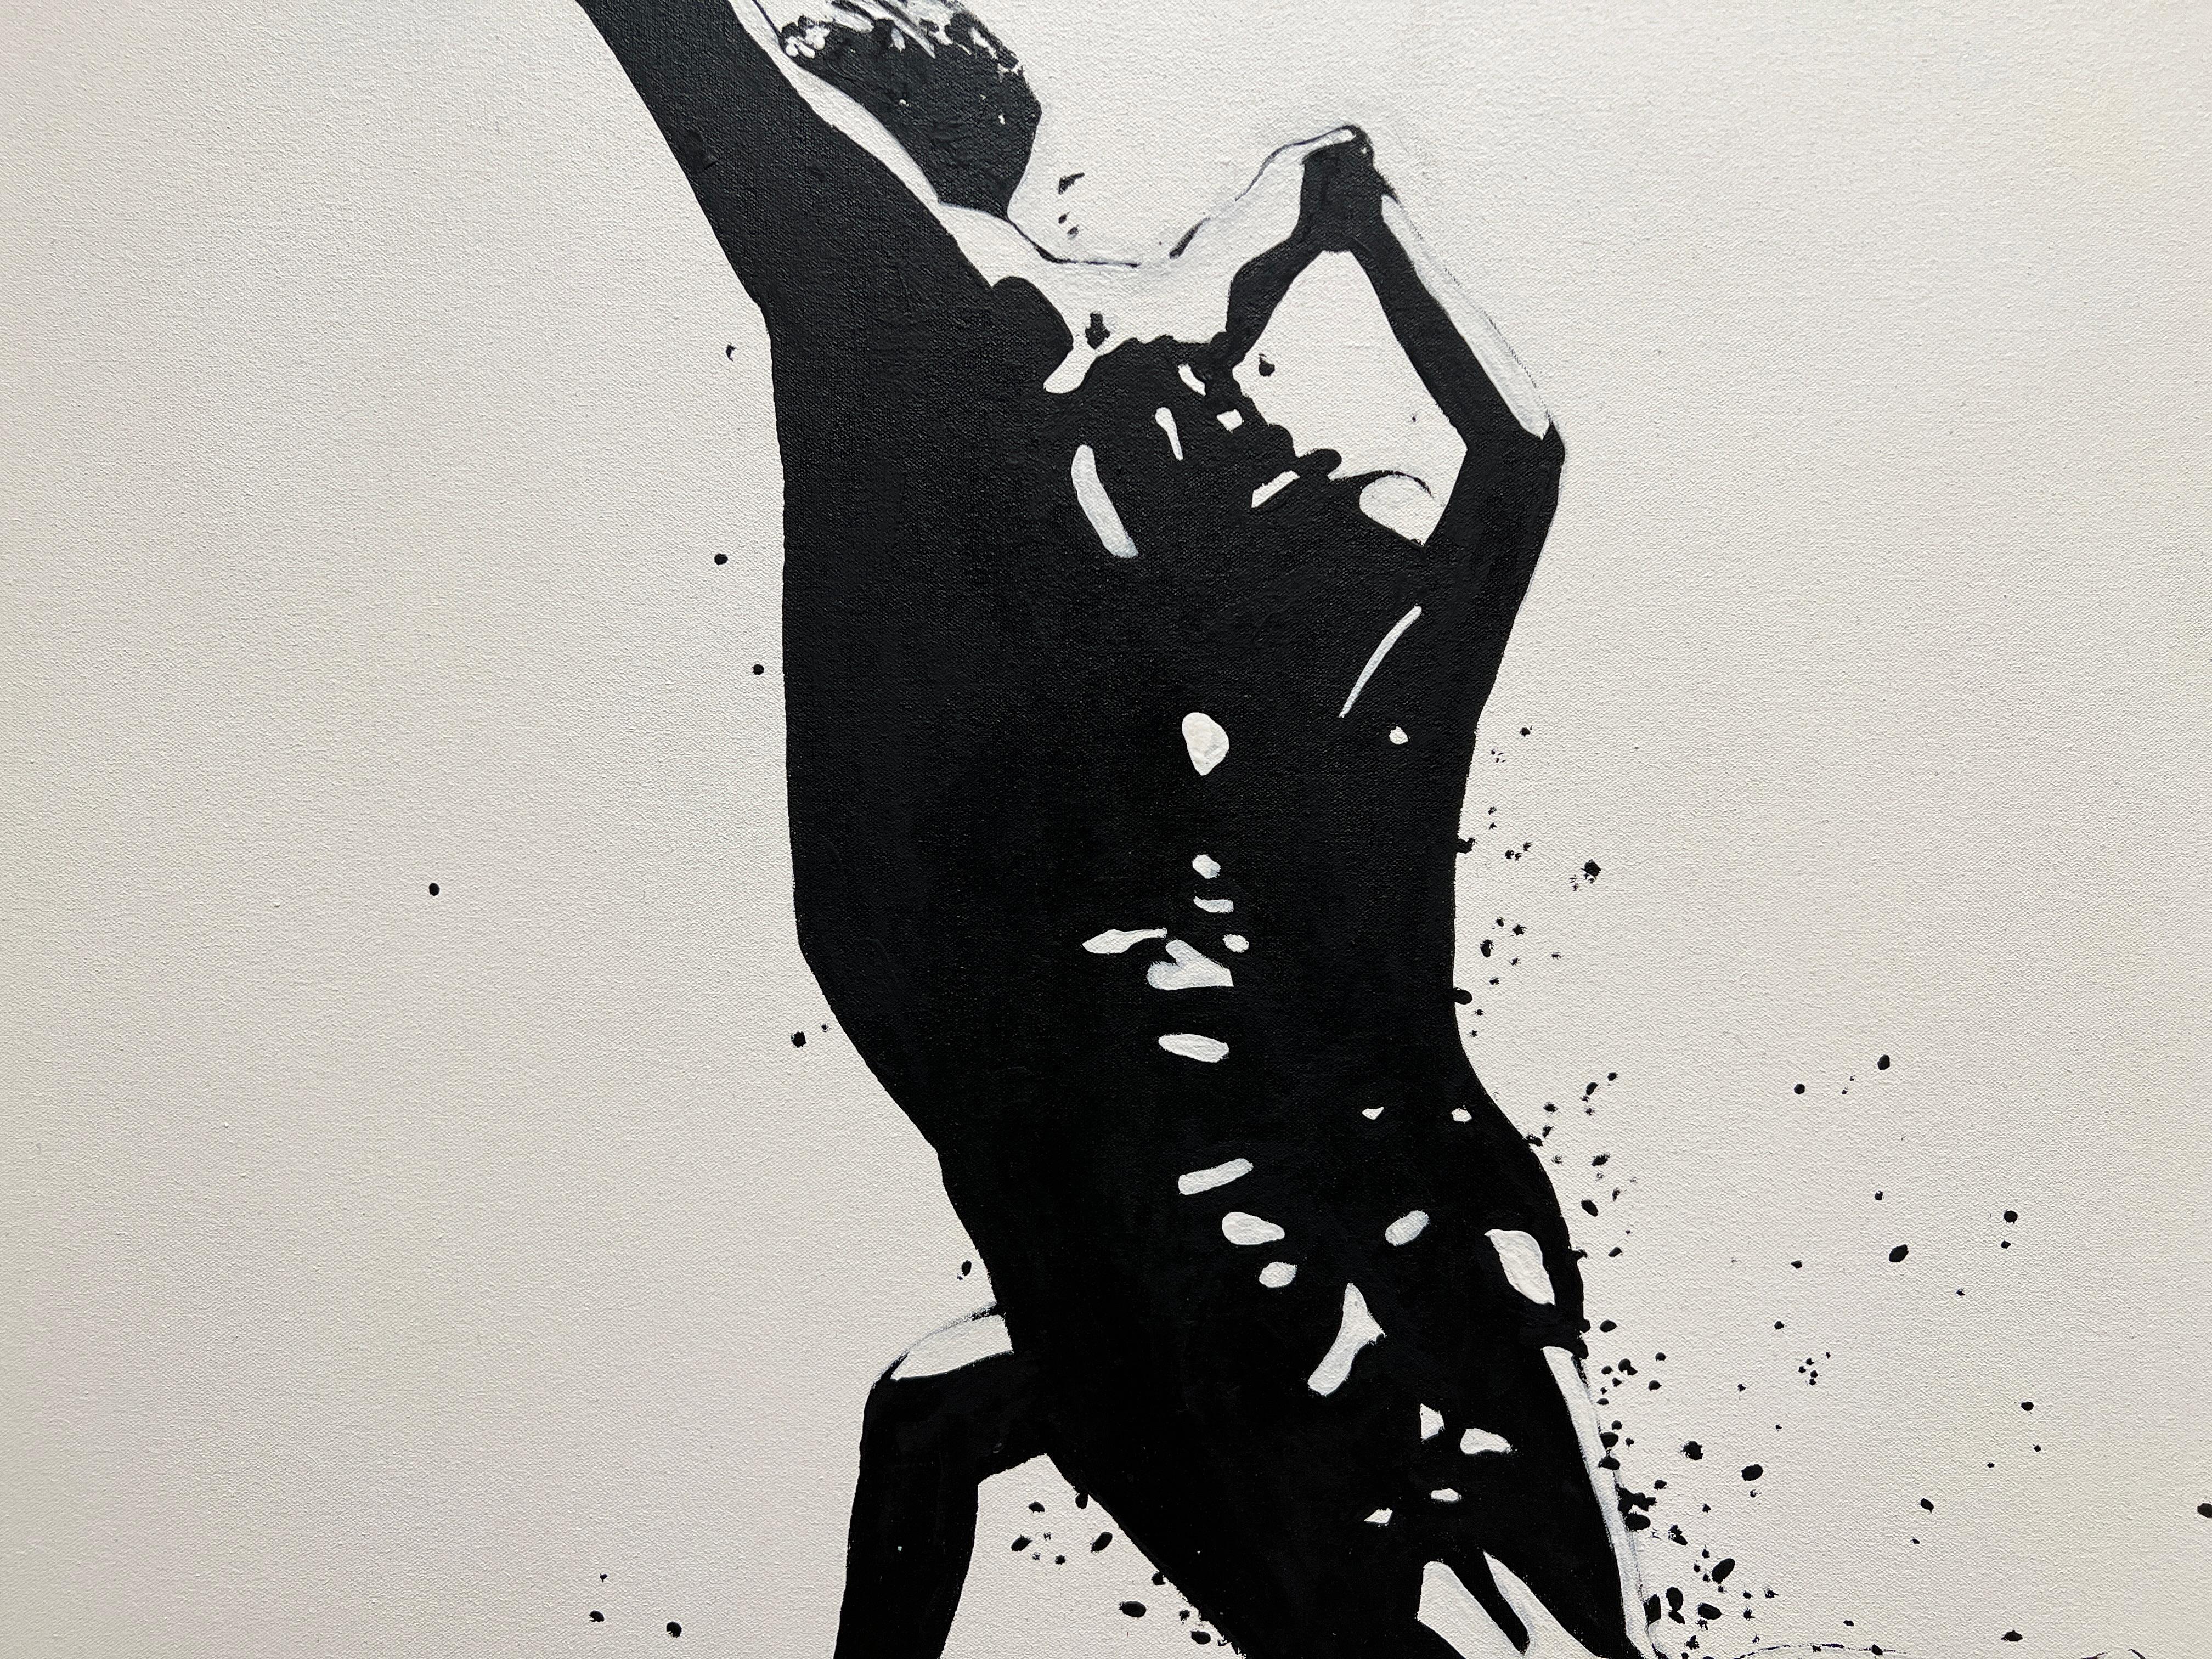 LAUNCHING - Contemporary Figurative Pop Art / Black and White Silhouette 1